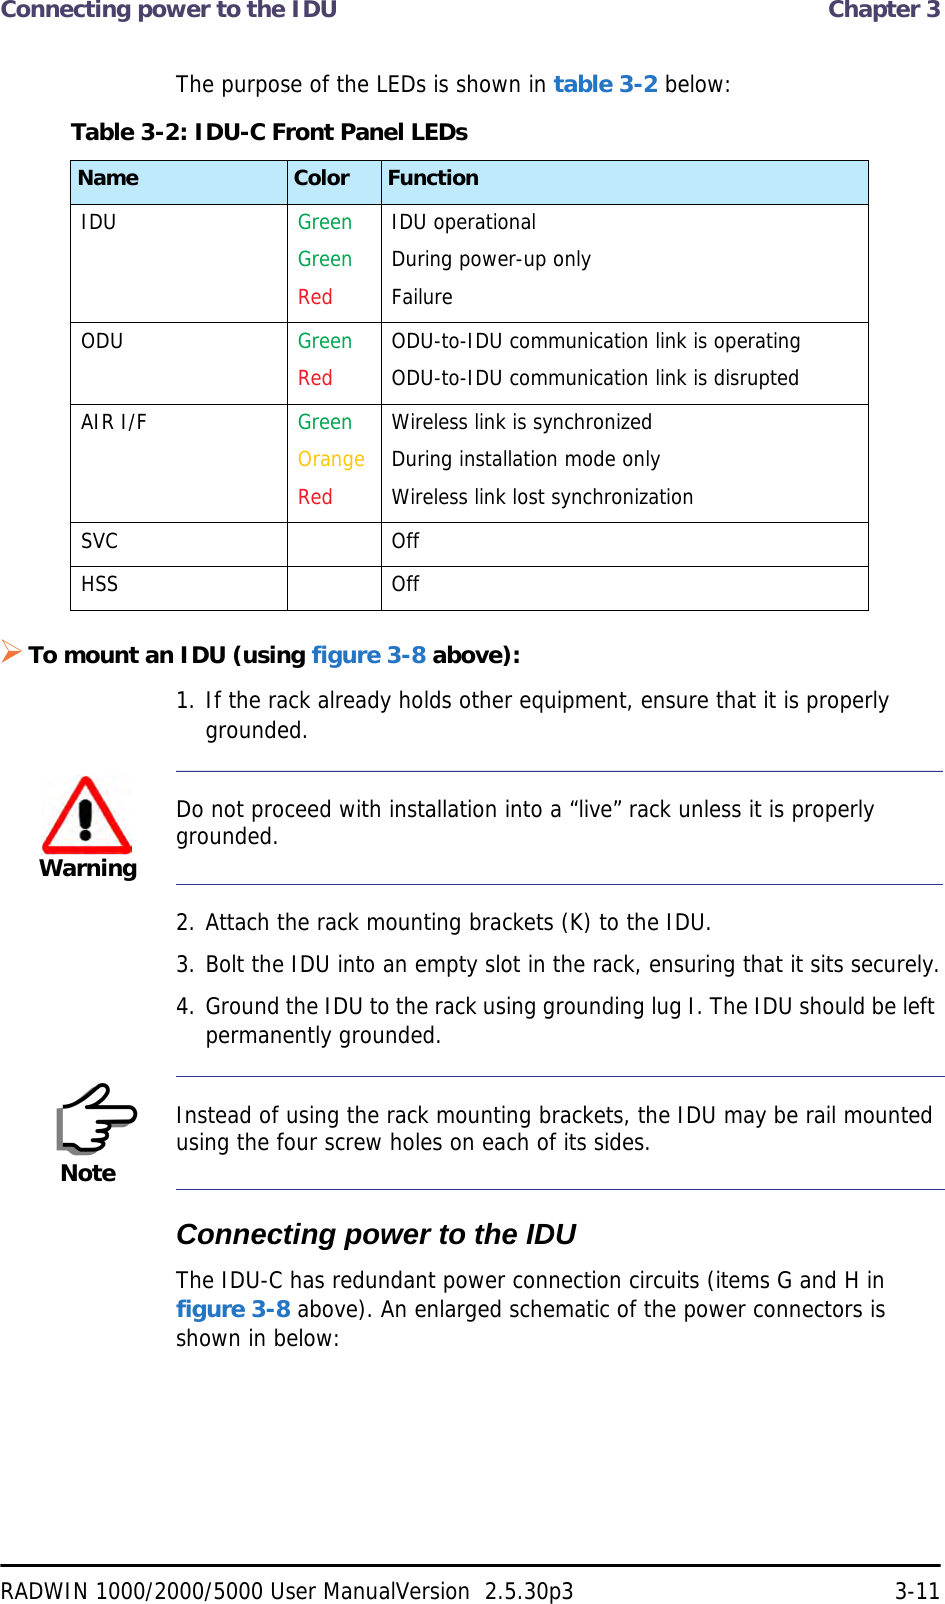 Connecting power to the IDU  Chapter 3RADWIN 1000/2000/5000 User ManualVersion  2.5.30p3 3-11The purpose of the LEDs is shown in table 3-2 below:To mount an IDU (using figure 3-8 above):1. If the rack already holds other equipment, ensure that it is properly grounded.2. Attach the rack mounting brackets (K) to the IDU.3. Bolt the IDU into an empty slot in the rack, ensuring that it sits securely.4. Ground the IDU to the rack using grounding lug I. The IDU should be left permanently grounded.Connecting power to the IDUThe IDU-C has redundant power connection circuits (items G and H in figure 3-8 above). An enlarged schematic of the power connectors is shown in below:Table 3-2: IDU-C Front Panel LEDsName Color FunctionIDU GreenGreenRedIDU operationalDuring power-up onlyFailureODU GreenRedODU-to-IDU communication link is operatingODU-to-IDU communication link is disrupted AIR I/F GreenOrangeRedWireless link is synchronizedDuring installation mode onlyWireless link lost synchronizationSVC OffHSS OffWarningDo not proceed with installation into a “live” rack unless it is properly grounded.NoteInstead of using the rack mounting brackets, the IDU may be rail mounted using the four screw holes on each of its sides.